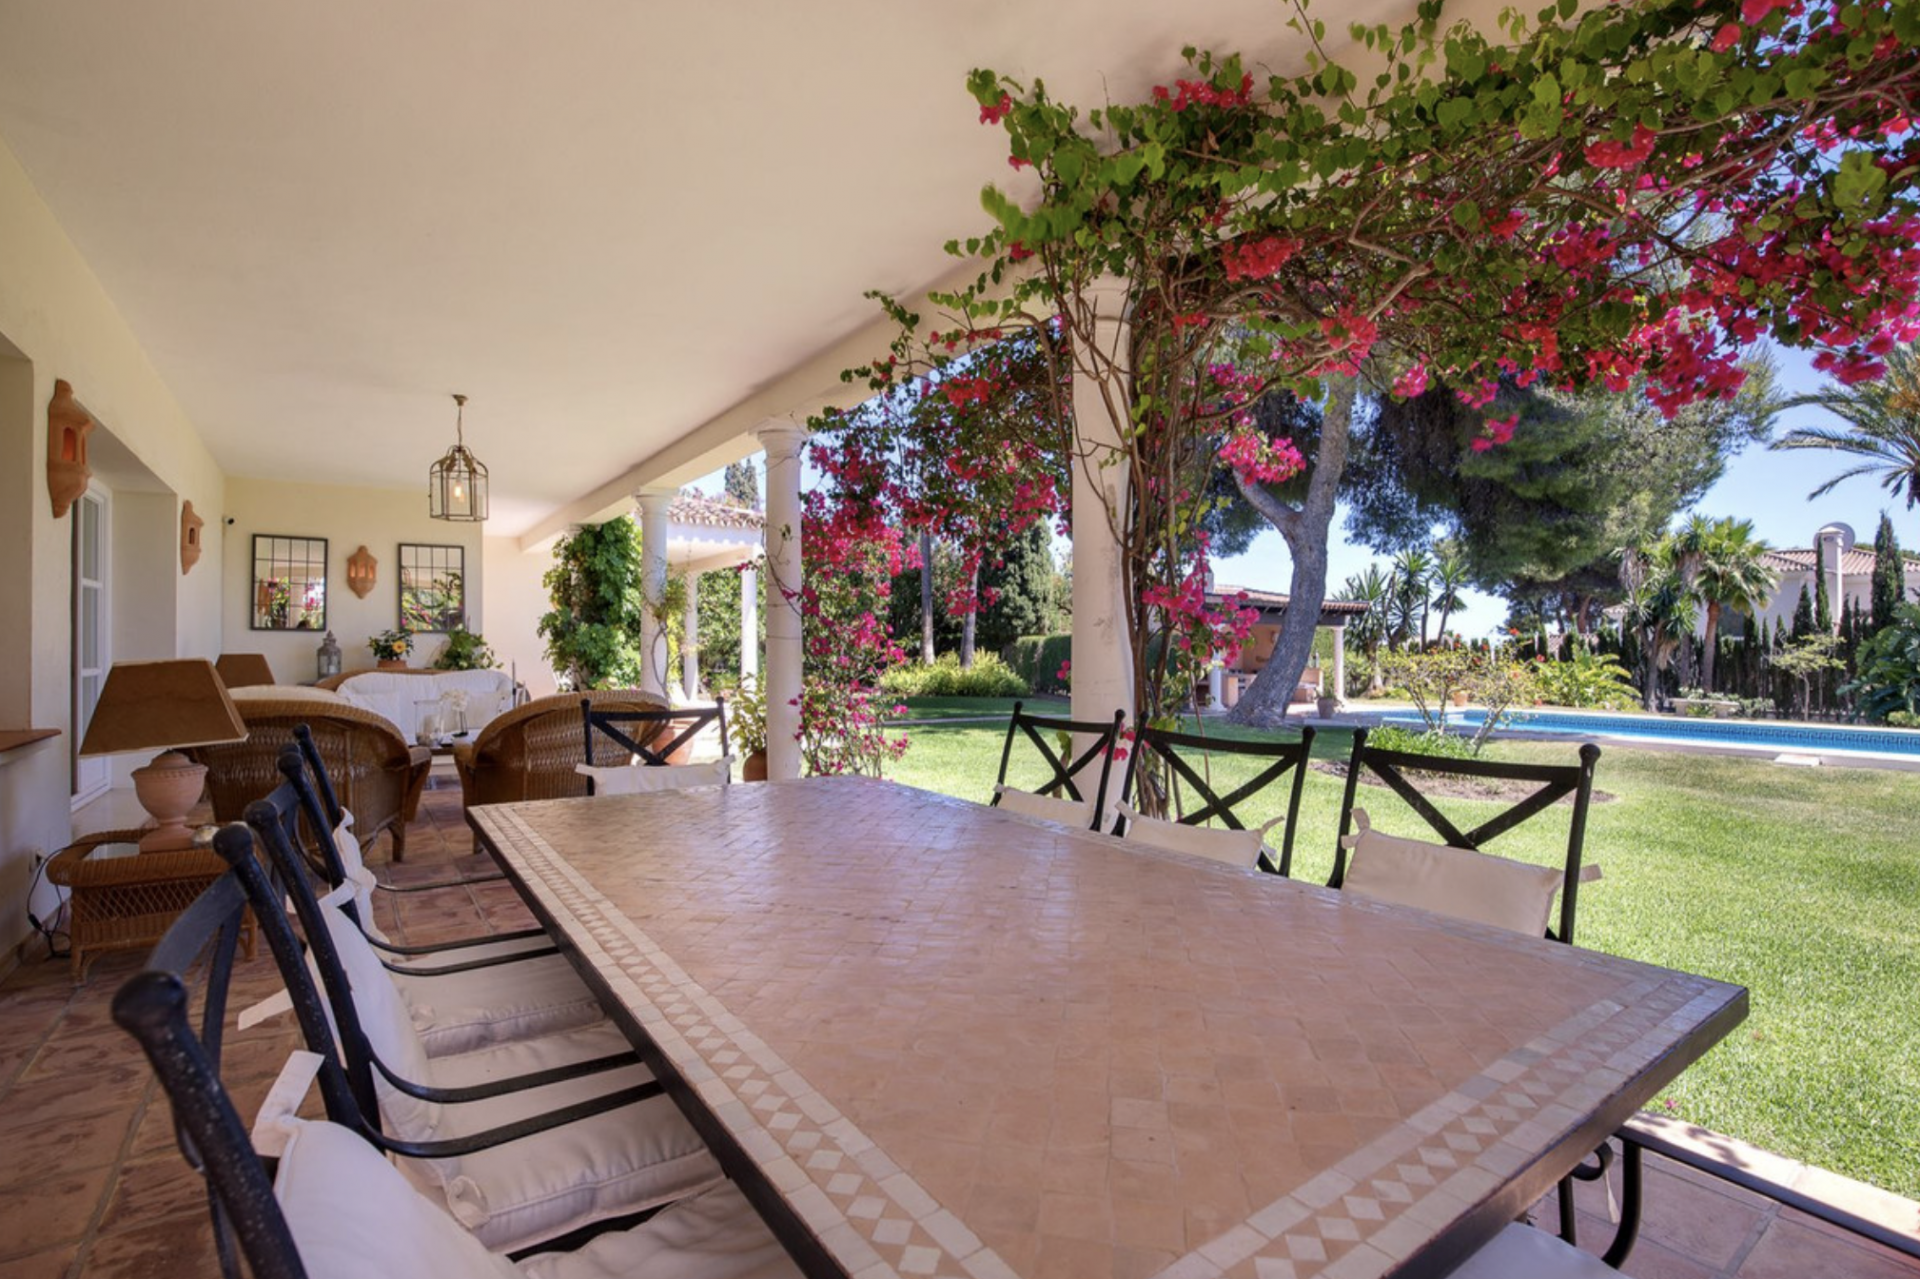 Lovely Andalusian-style villa set on a large flat plot located in Paraiso Medio